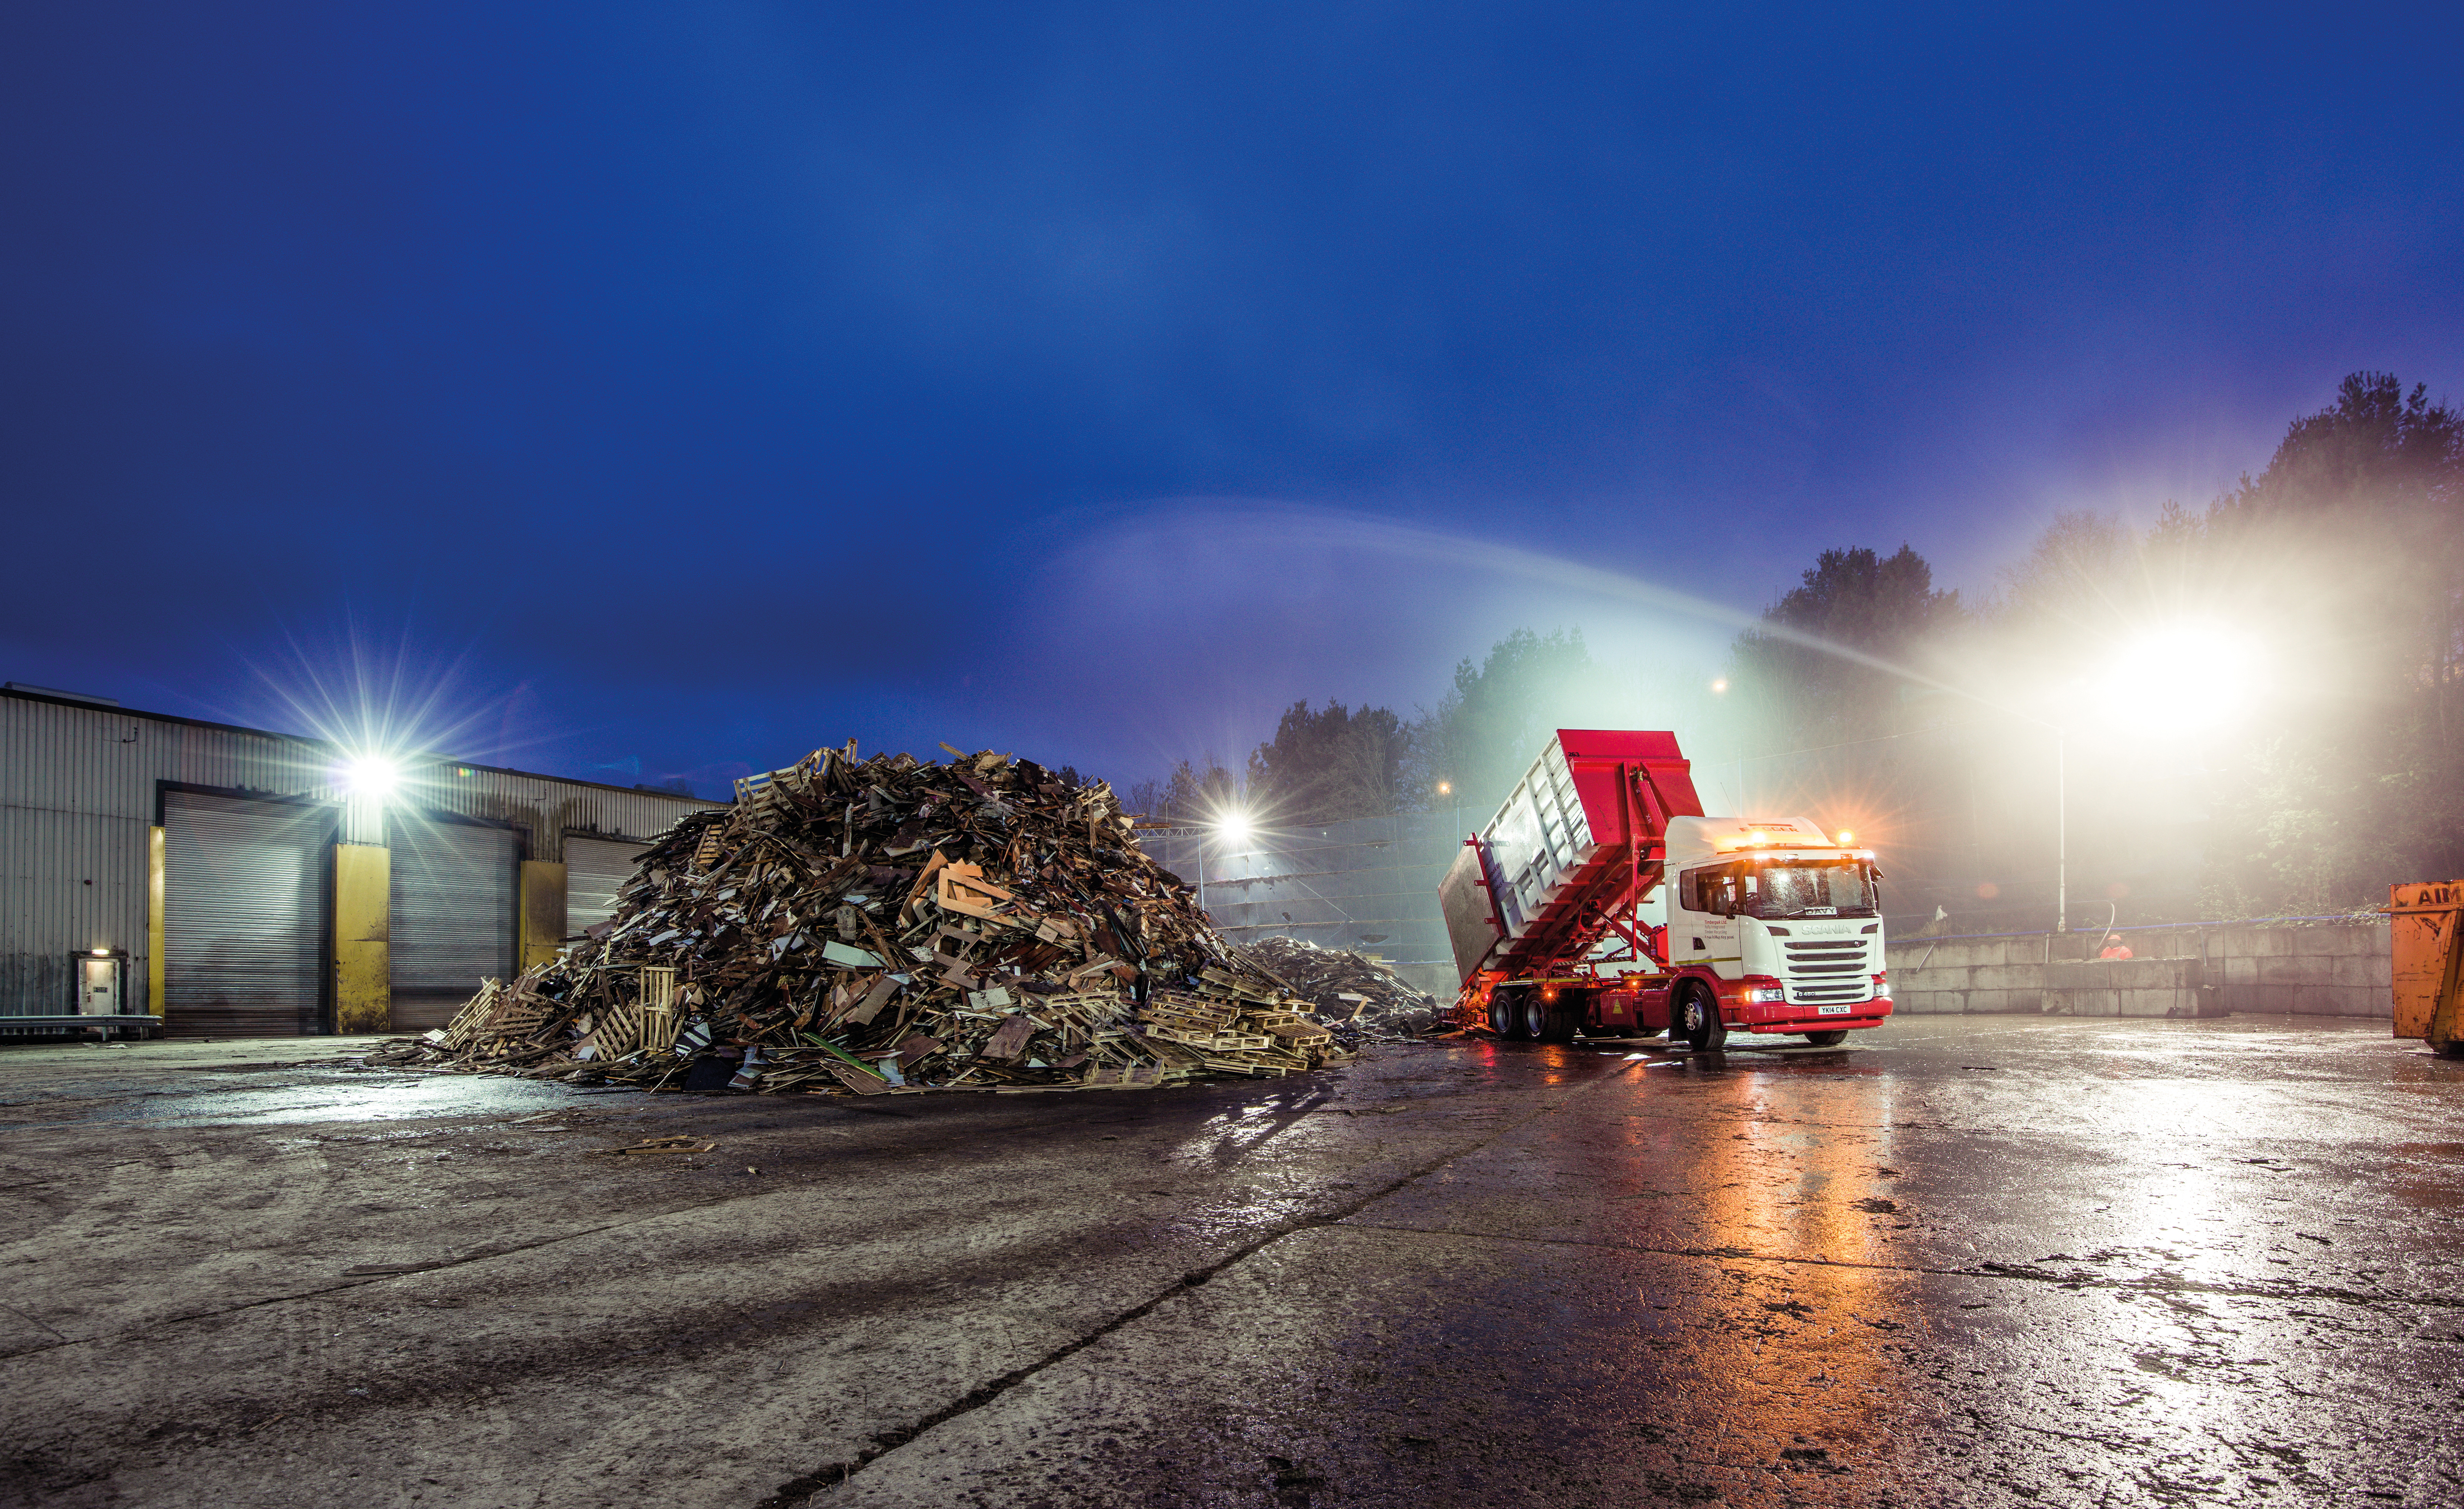 Watch the fully integrated timber recycling process at Timberpak Ltd